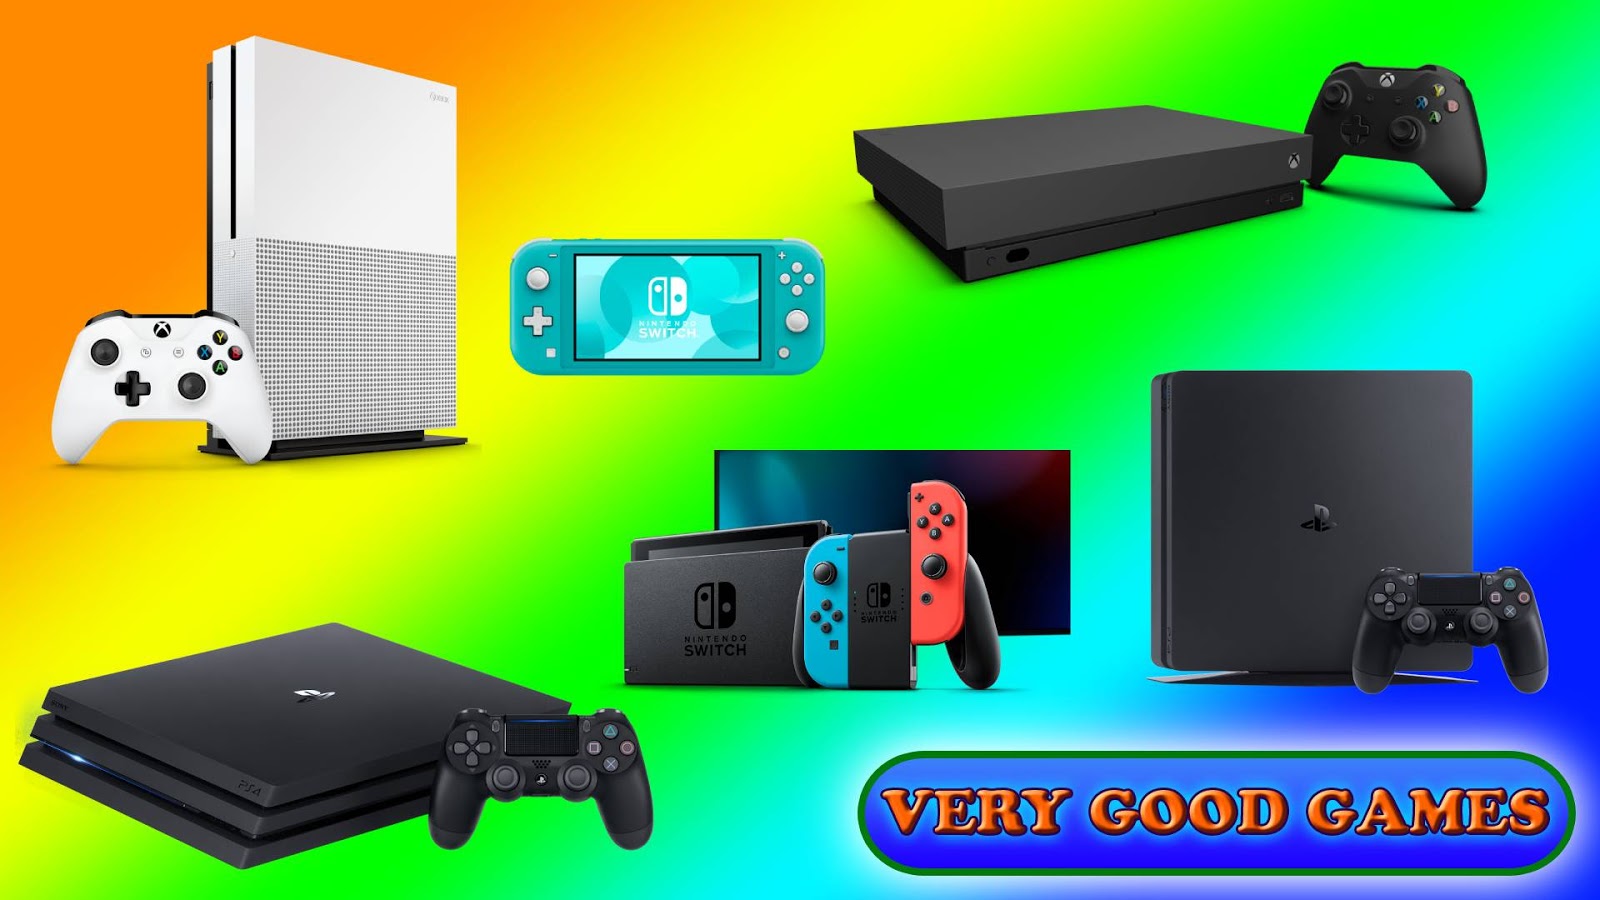 Devices to play games: PlayStation 4, Xbox One, Nintendo Switch. The best game consoles